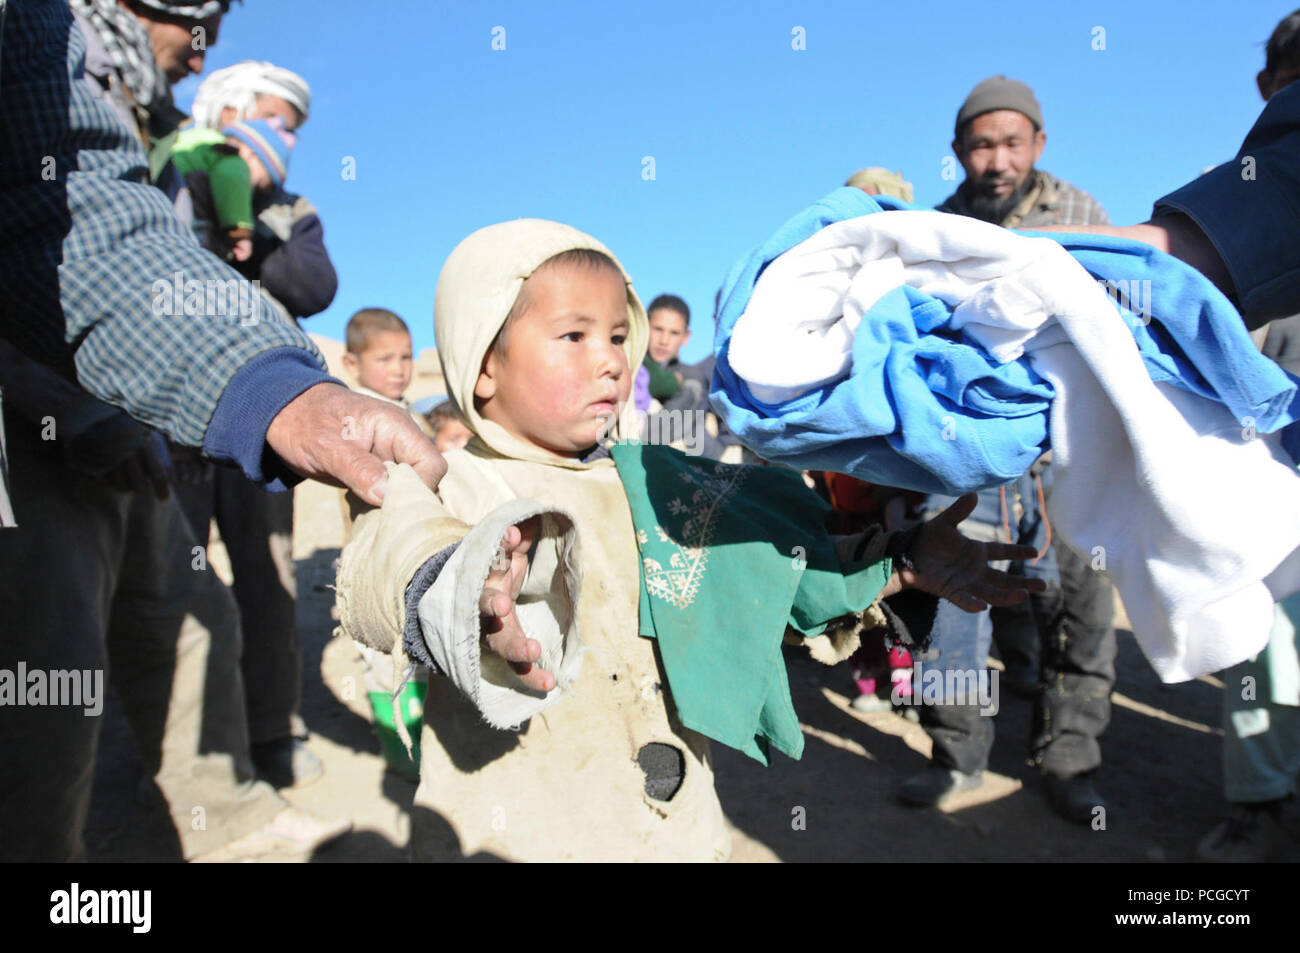 A young boy reaches for some warm clothes at Aq Robat, a remote village more than 20 miles northwest of Bamyan, Dec. 24. The clothes were donated by Operation Care: Afghanistan, a non-profit, private charitable organization based at Bagram Airfield, Afghanistan. Stock Photo